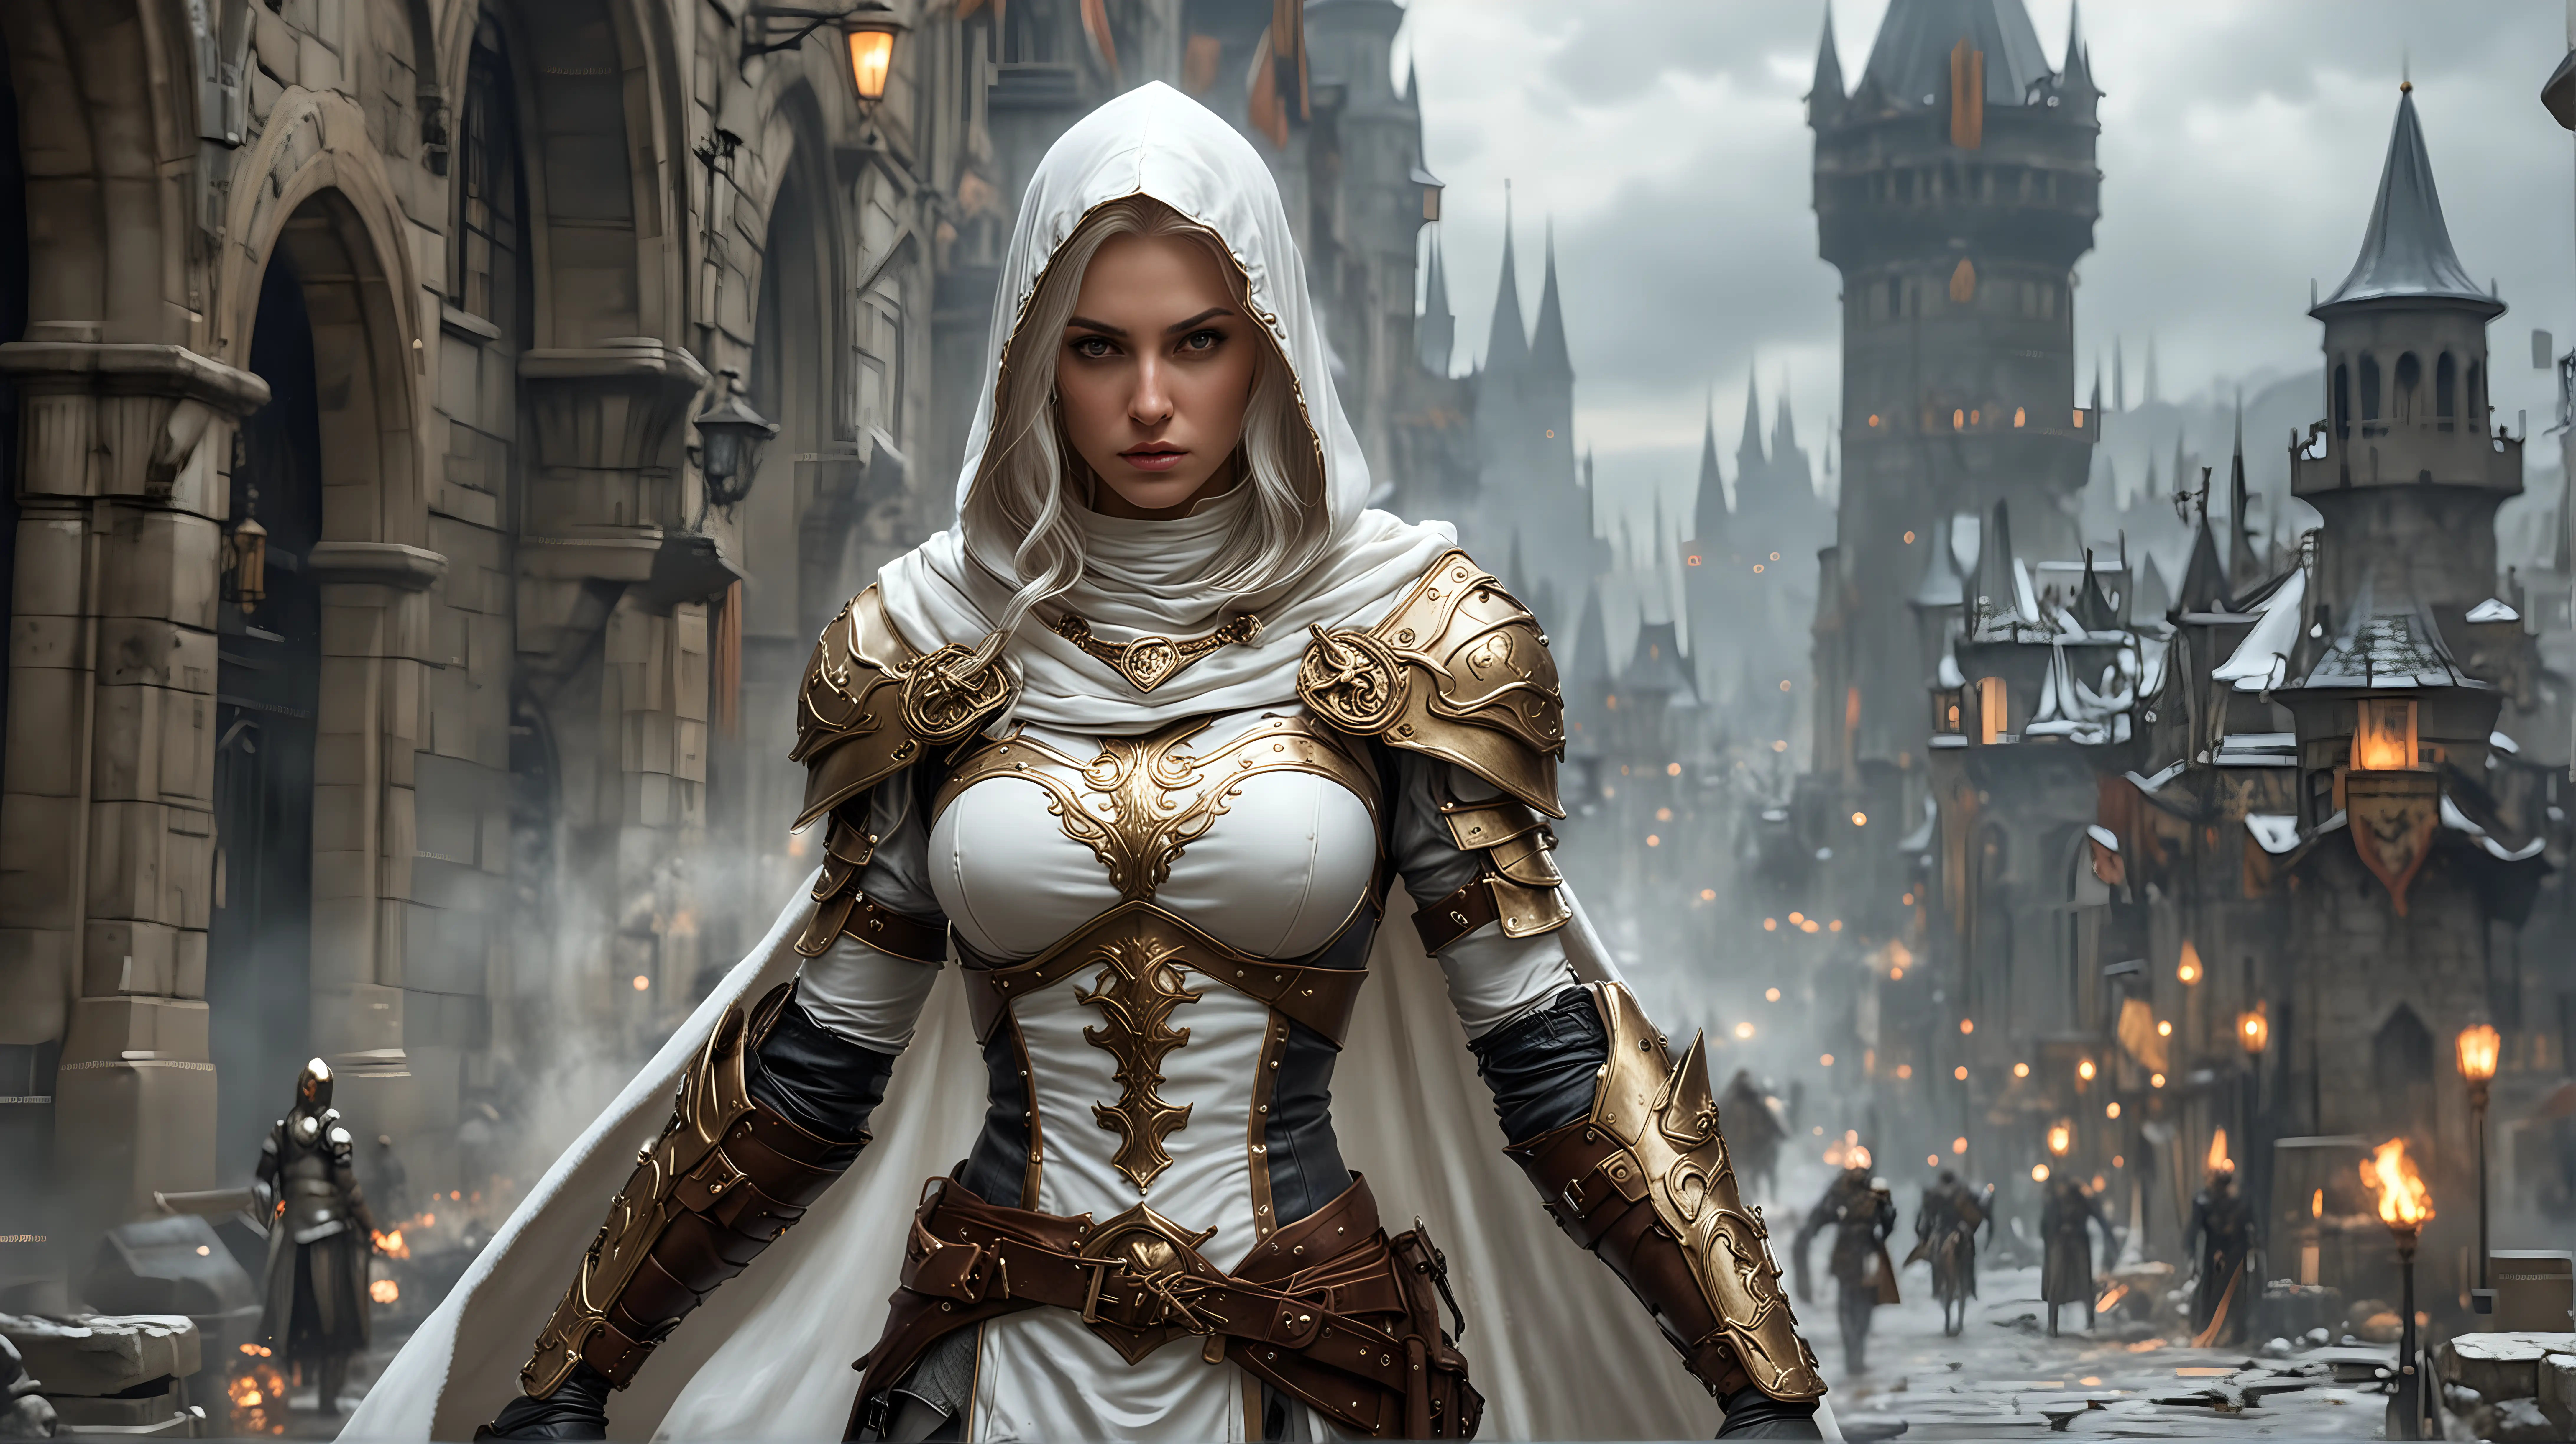 inquisitor , knight, woman, epic fantasy, white hood, cloak, large shield, knight mask, white, banner from shoulder, gold armour trim, angry look, weapons drawn. city back drop